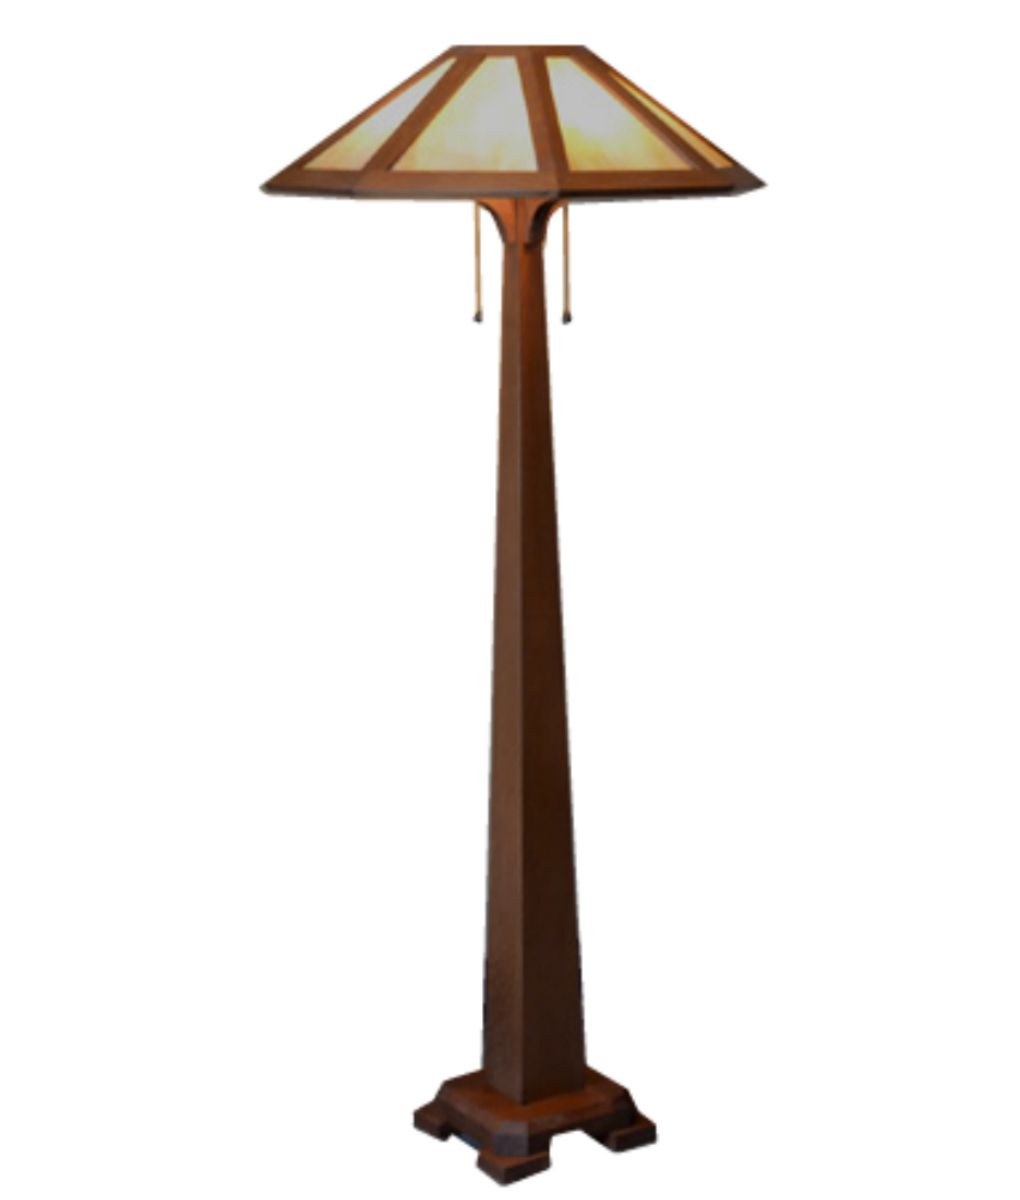 Mission Craftsman Floor Lamp Saugatuck In 2019 Craftsman within size 1020 X 1200